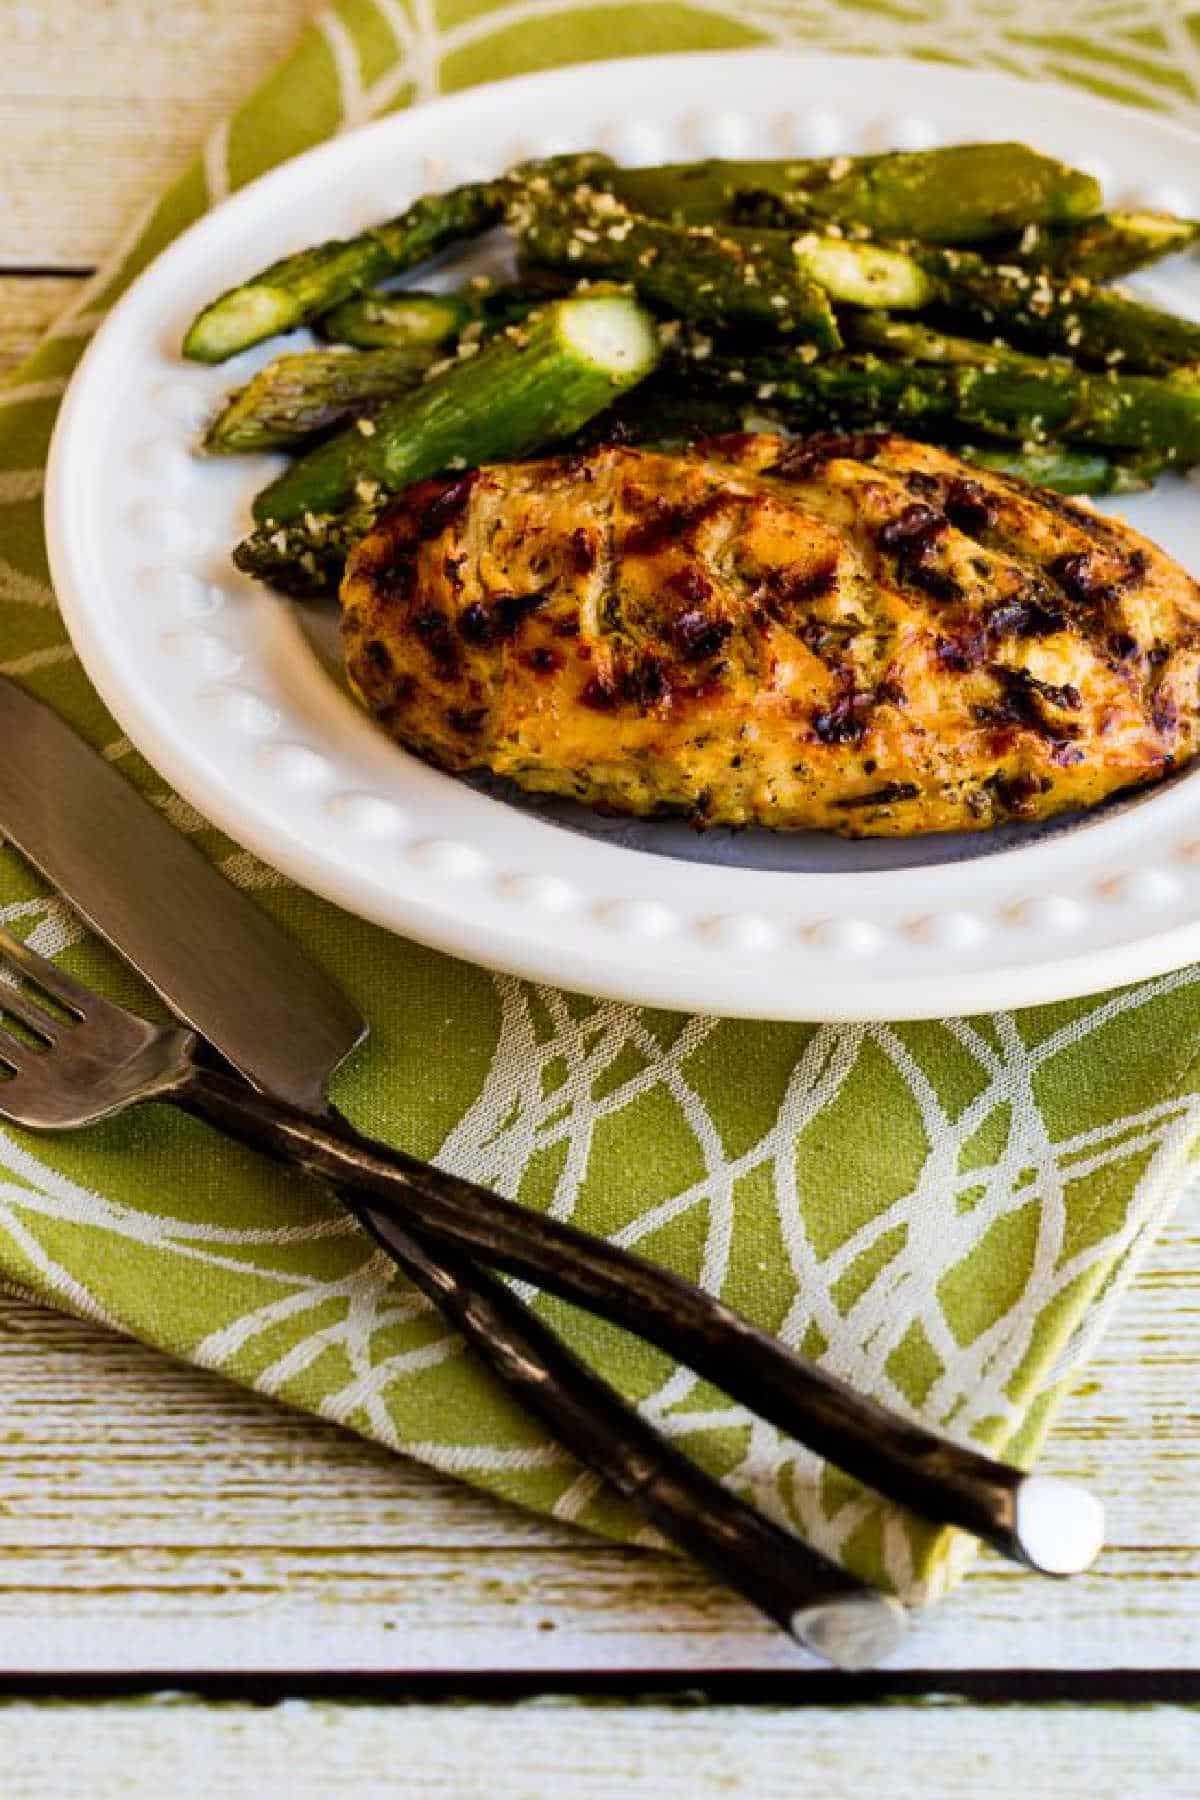 Rosemary Mustard Grilled Chicken on serving plate with napkin and fork/knife on the side